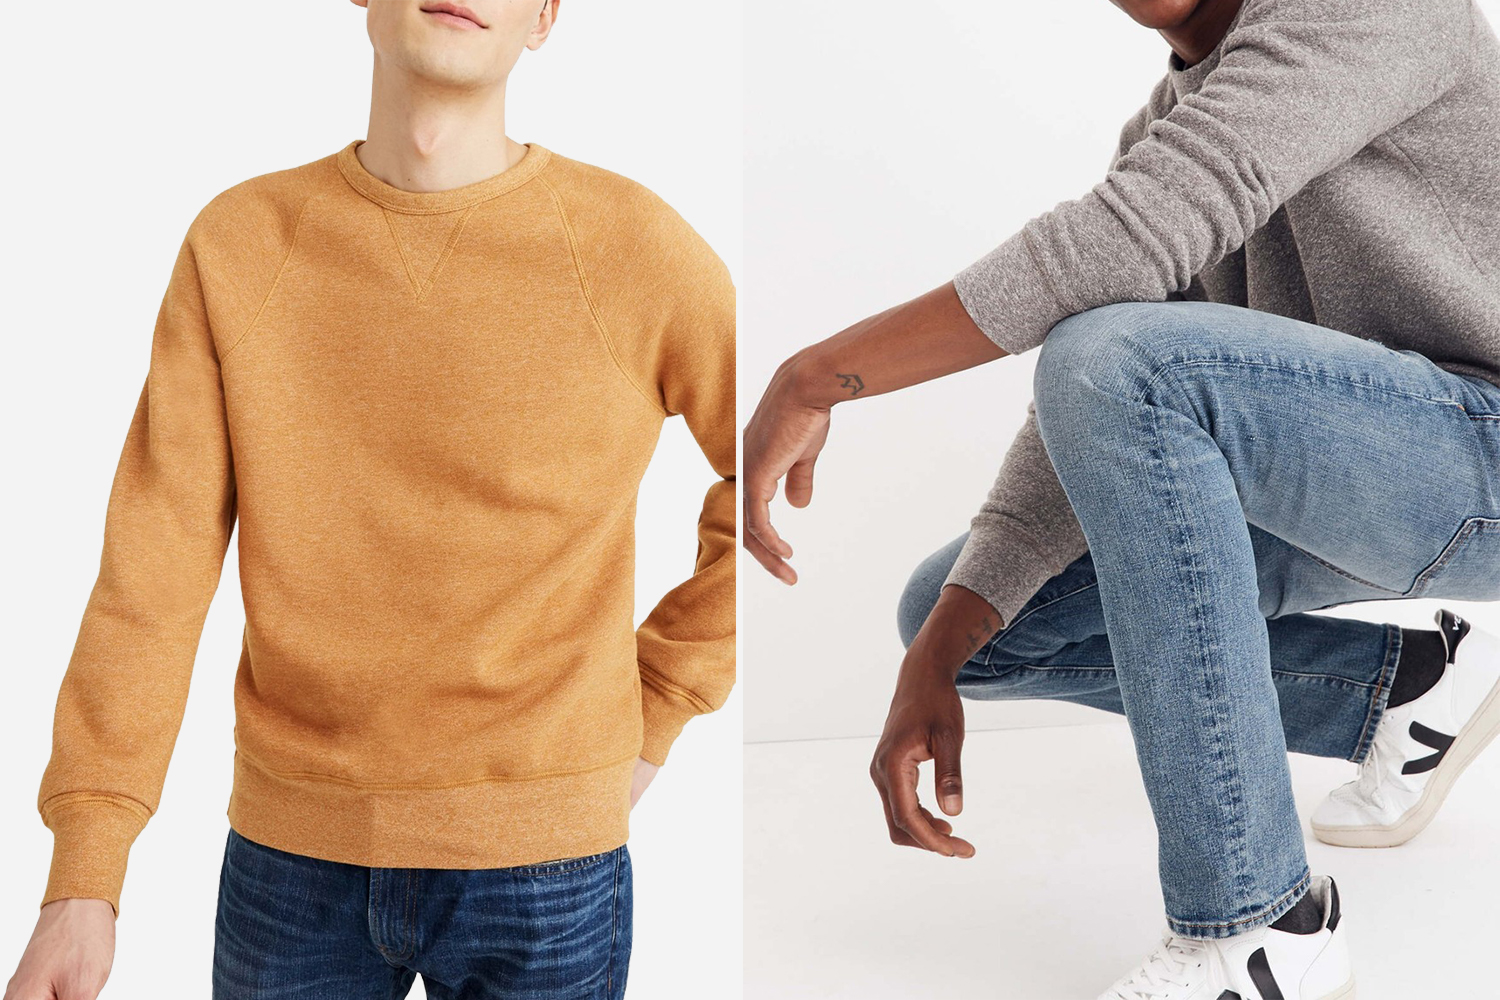 Madewell Men's Denim, Shirts and More Are on Sale at Nordstrom Rack ...